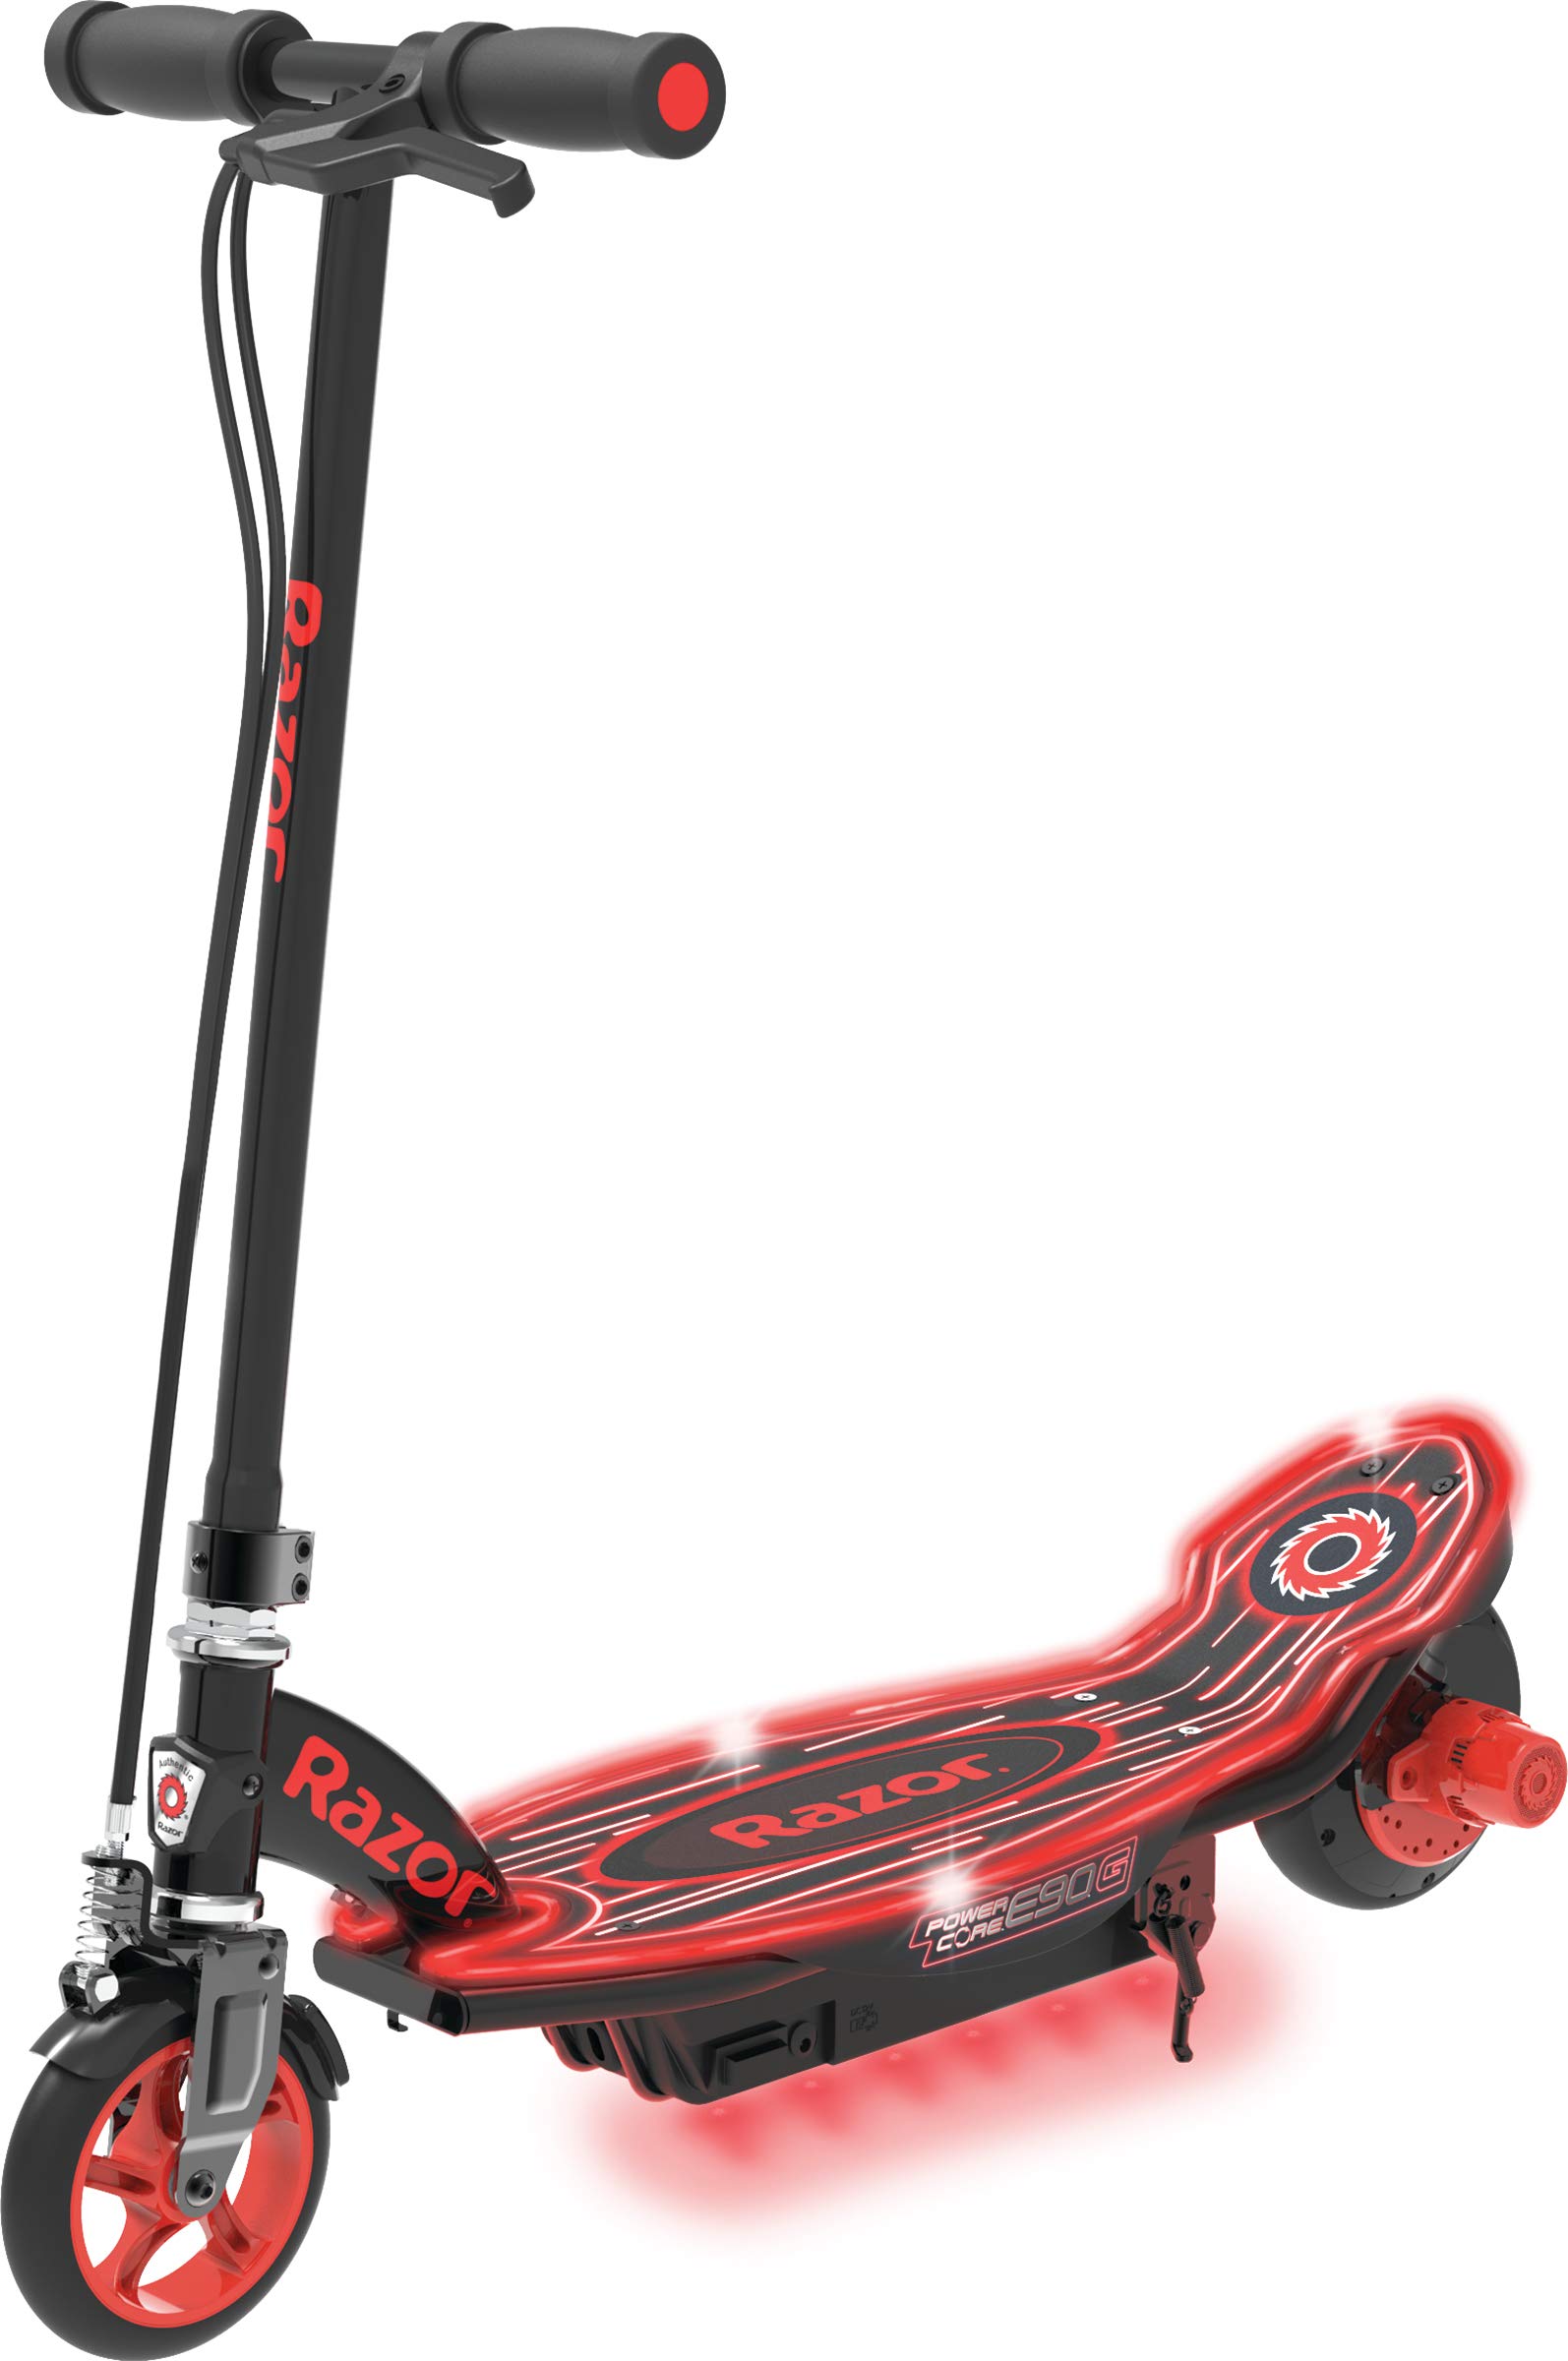 RAZOR Power Core E90 Electric Scooter - Hub Motor, Up to 10 mph and 80 min Ride Time, for Kids 8 and Up